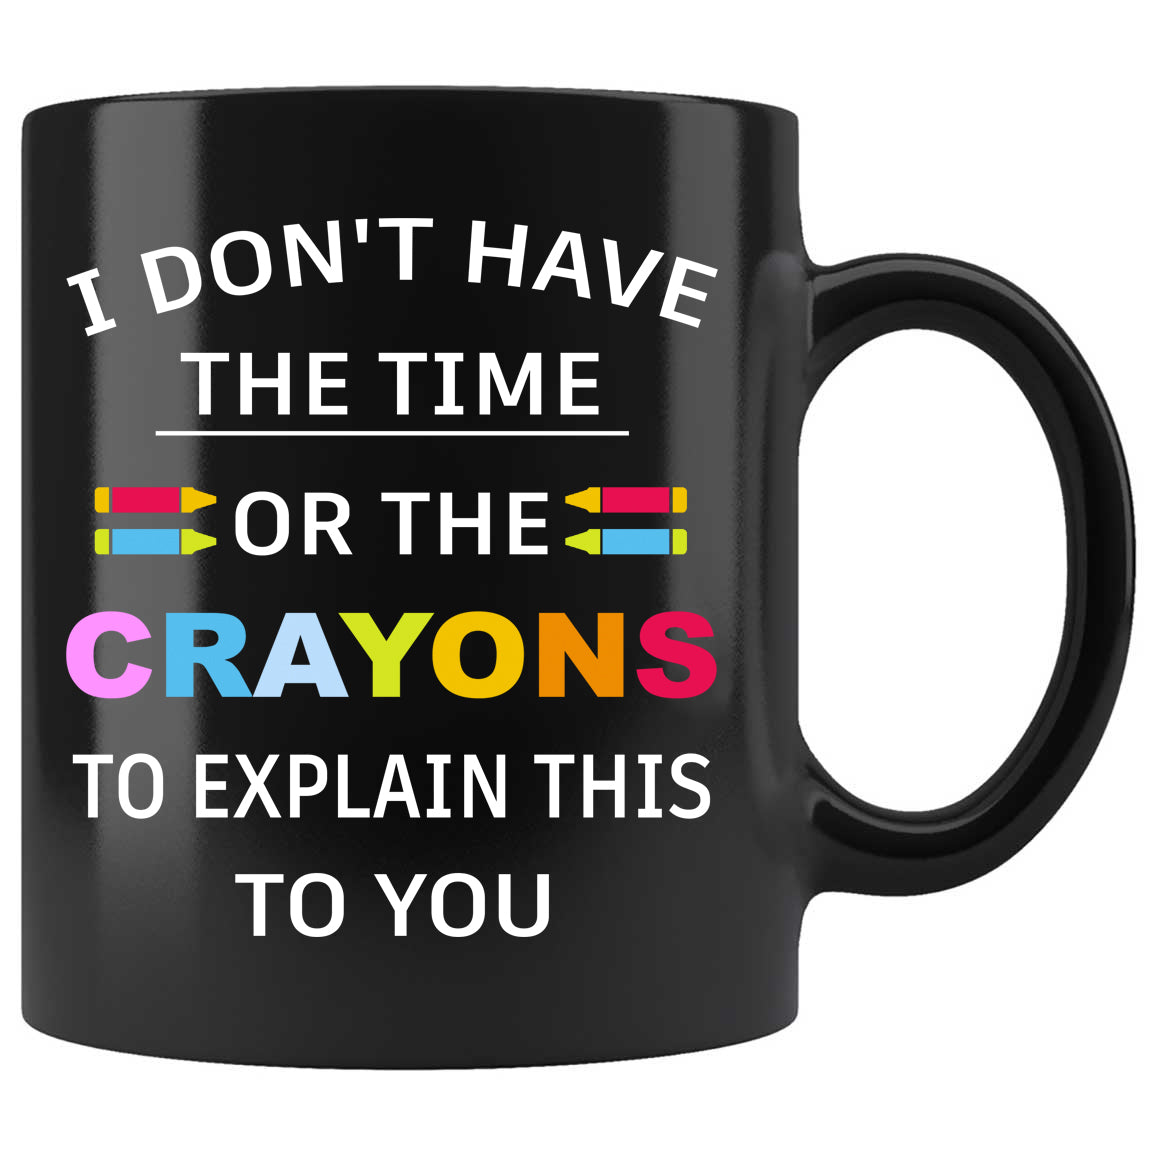 I Don't Have The Time Or The Crayons To Explain This To You Skitongifts Funny Ceramic Coffee Mug For Birthday, Mother's Day, Father's Day, Christmas